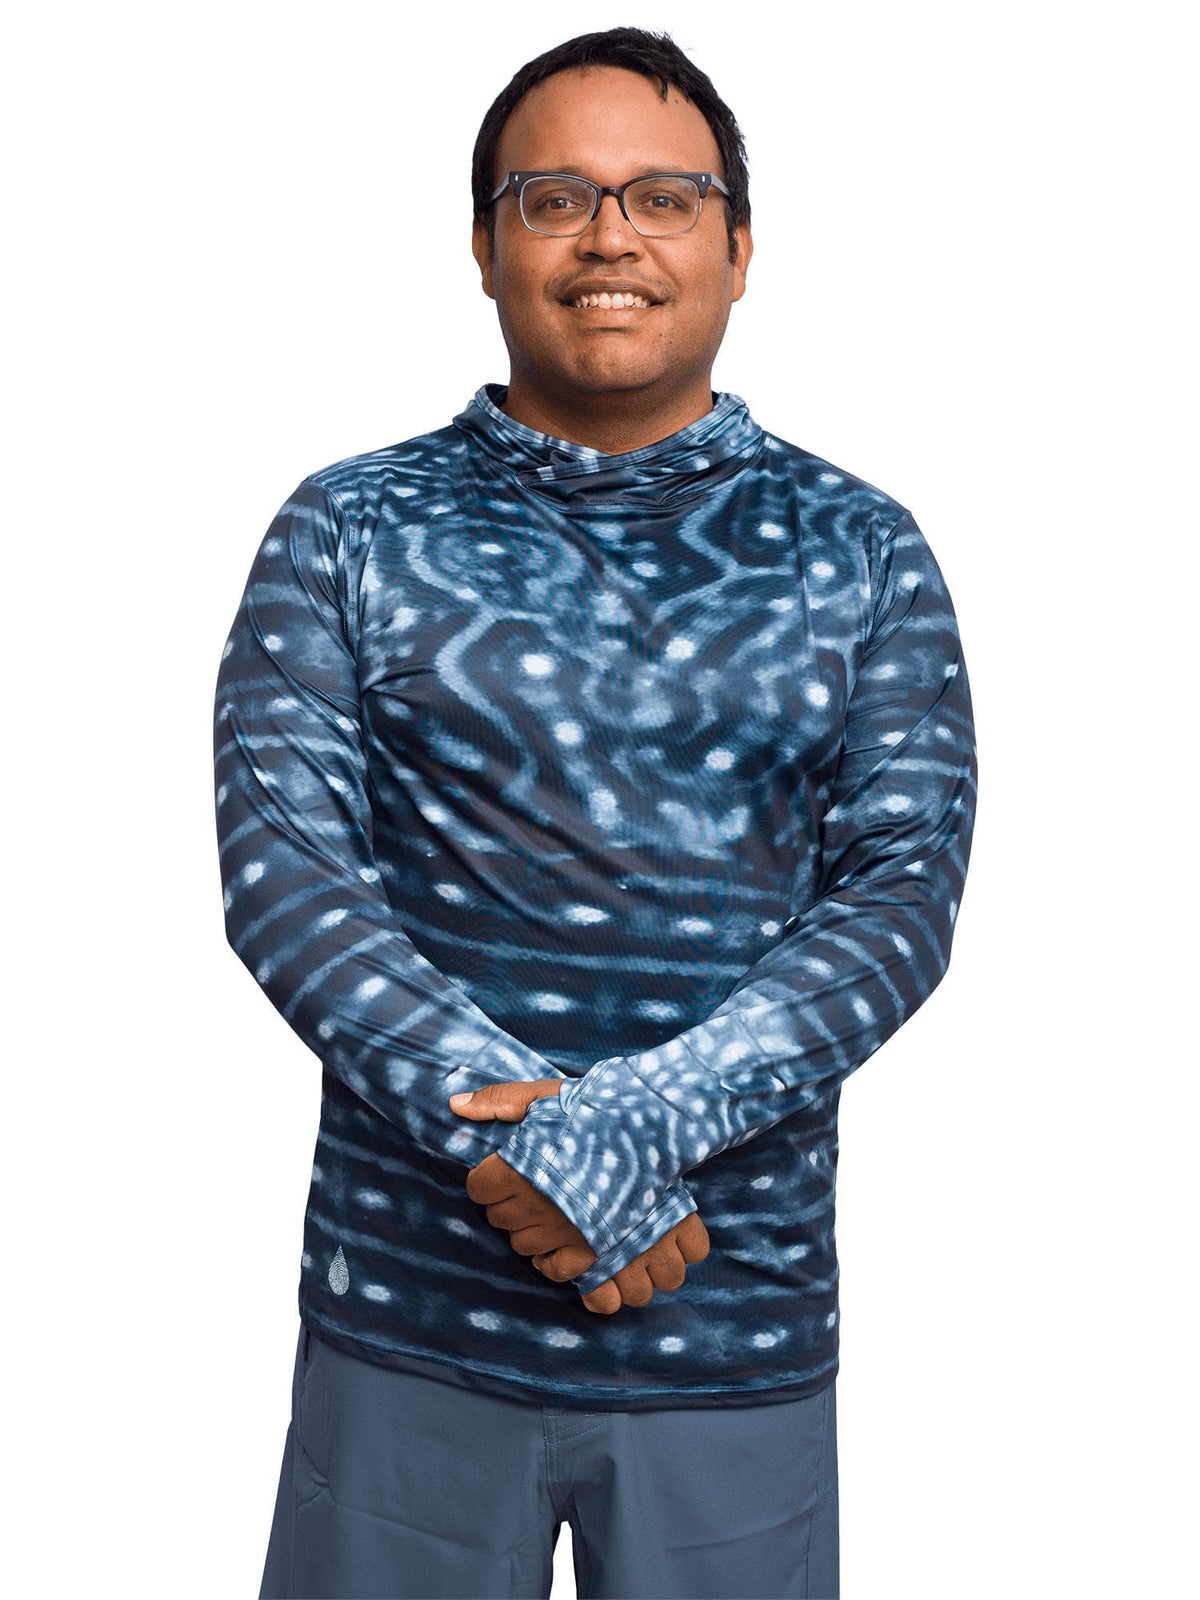 Model: Alberto is a professional sailor and filmmaker promoting youth participation in conservation and water sports. He is 6&#39;, 247lbs and wearing a size 2XL shirt and 29 boardshorts. 